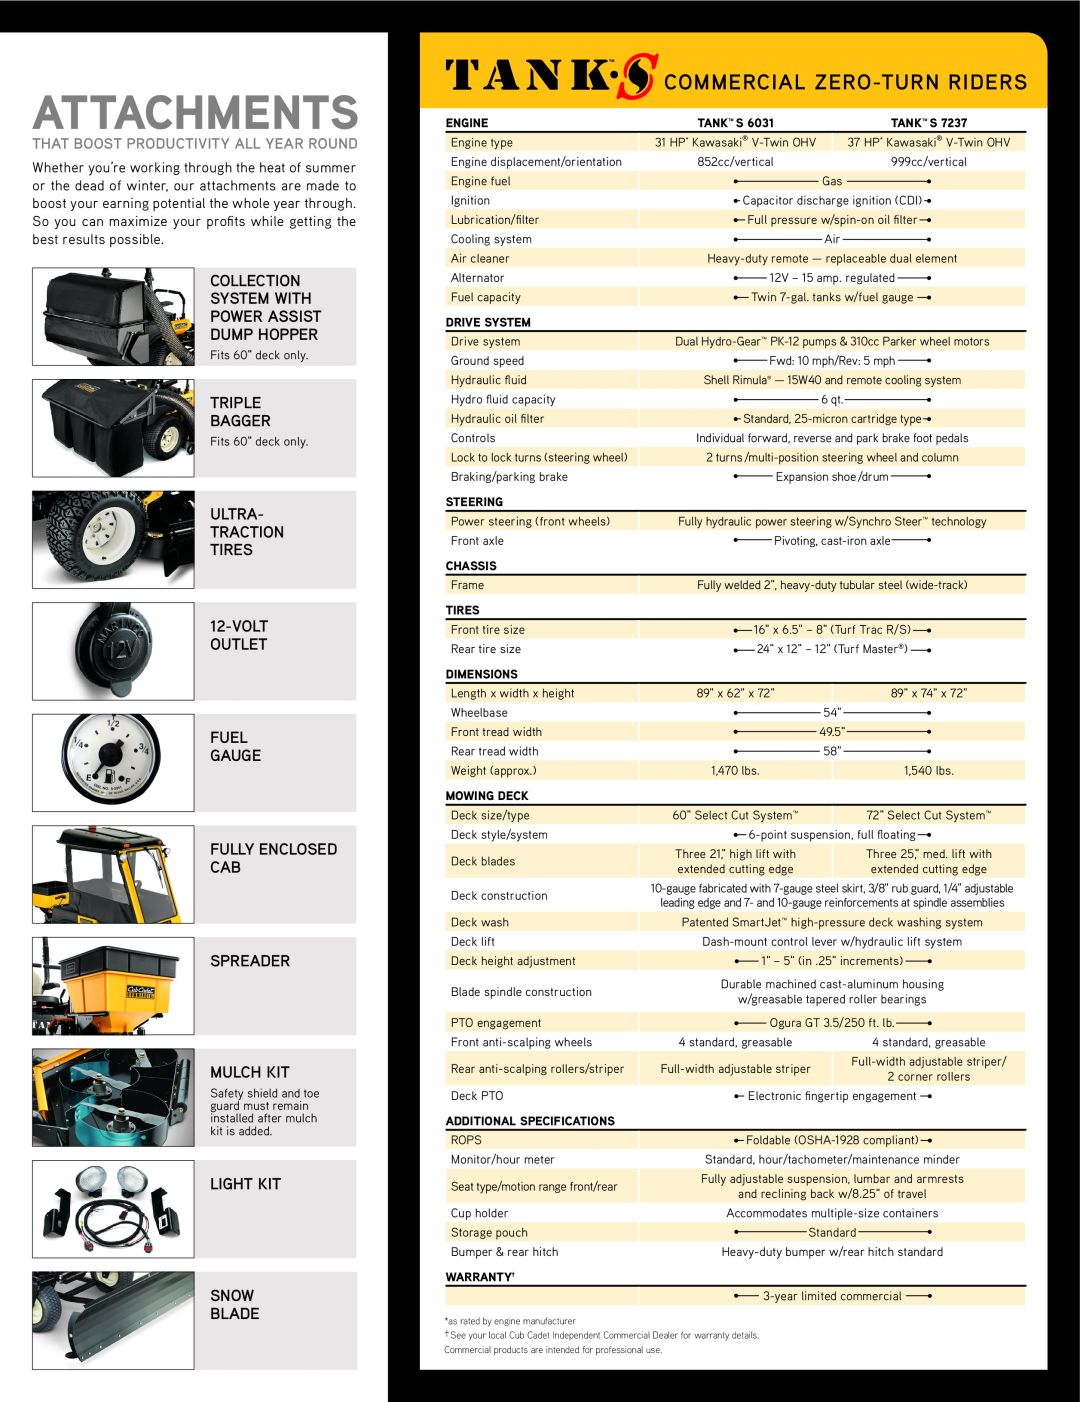 Cub Cadet 6031 manual Commercial Zero-Turn Riders, Attachments, collection system with, triple bagger, Light Kit Snow Blade 